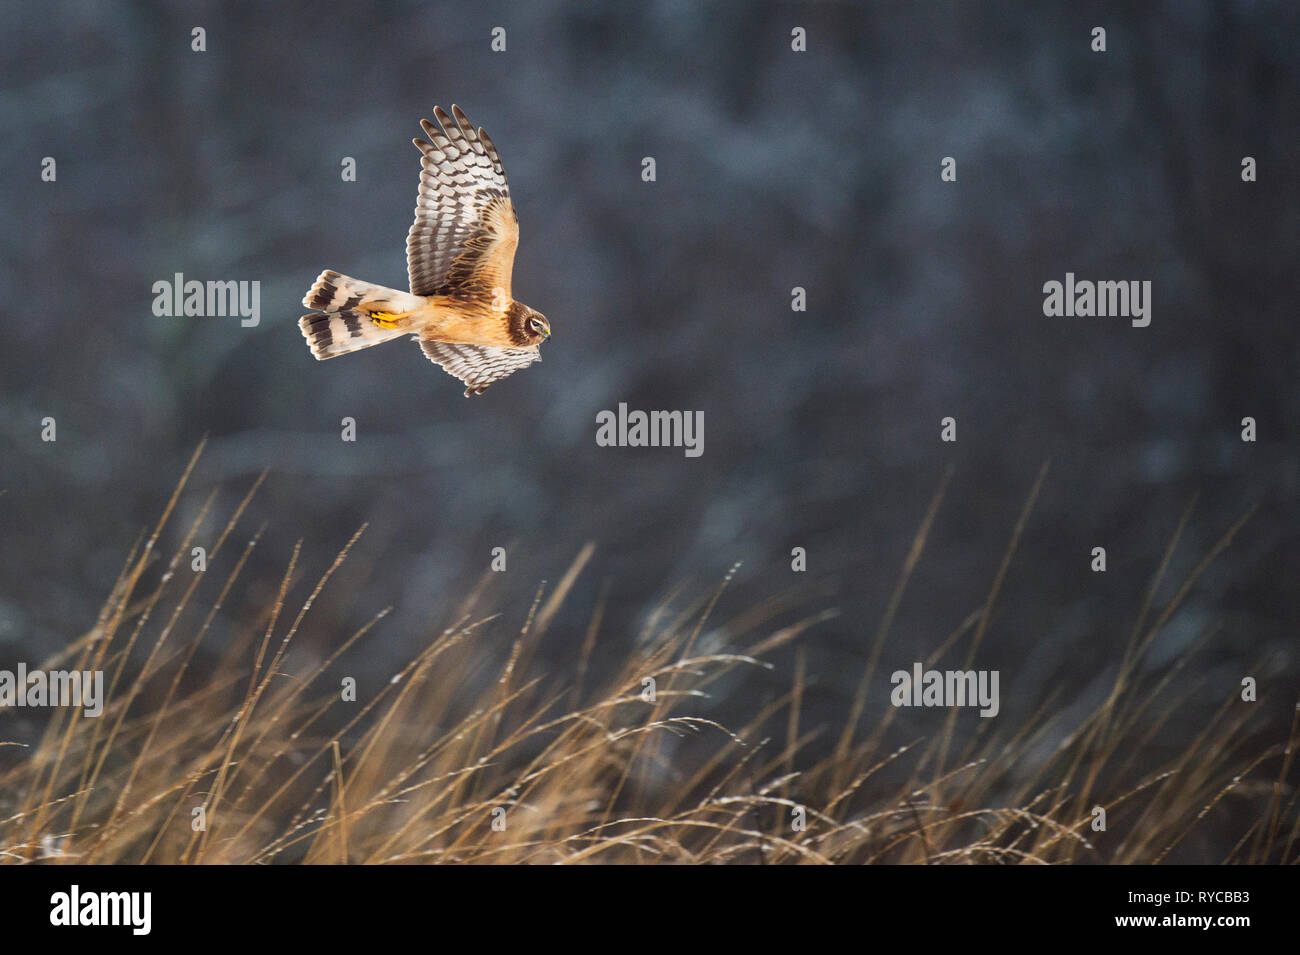 A Northern Harrier flies low over the grasses that have small bits of snow clinging to them on an overcast winter day. Stock Photo